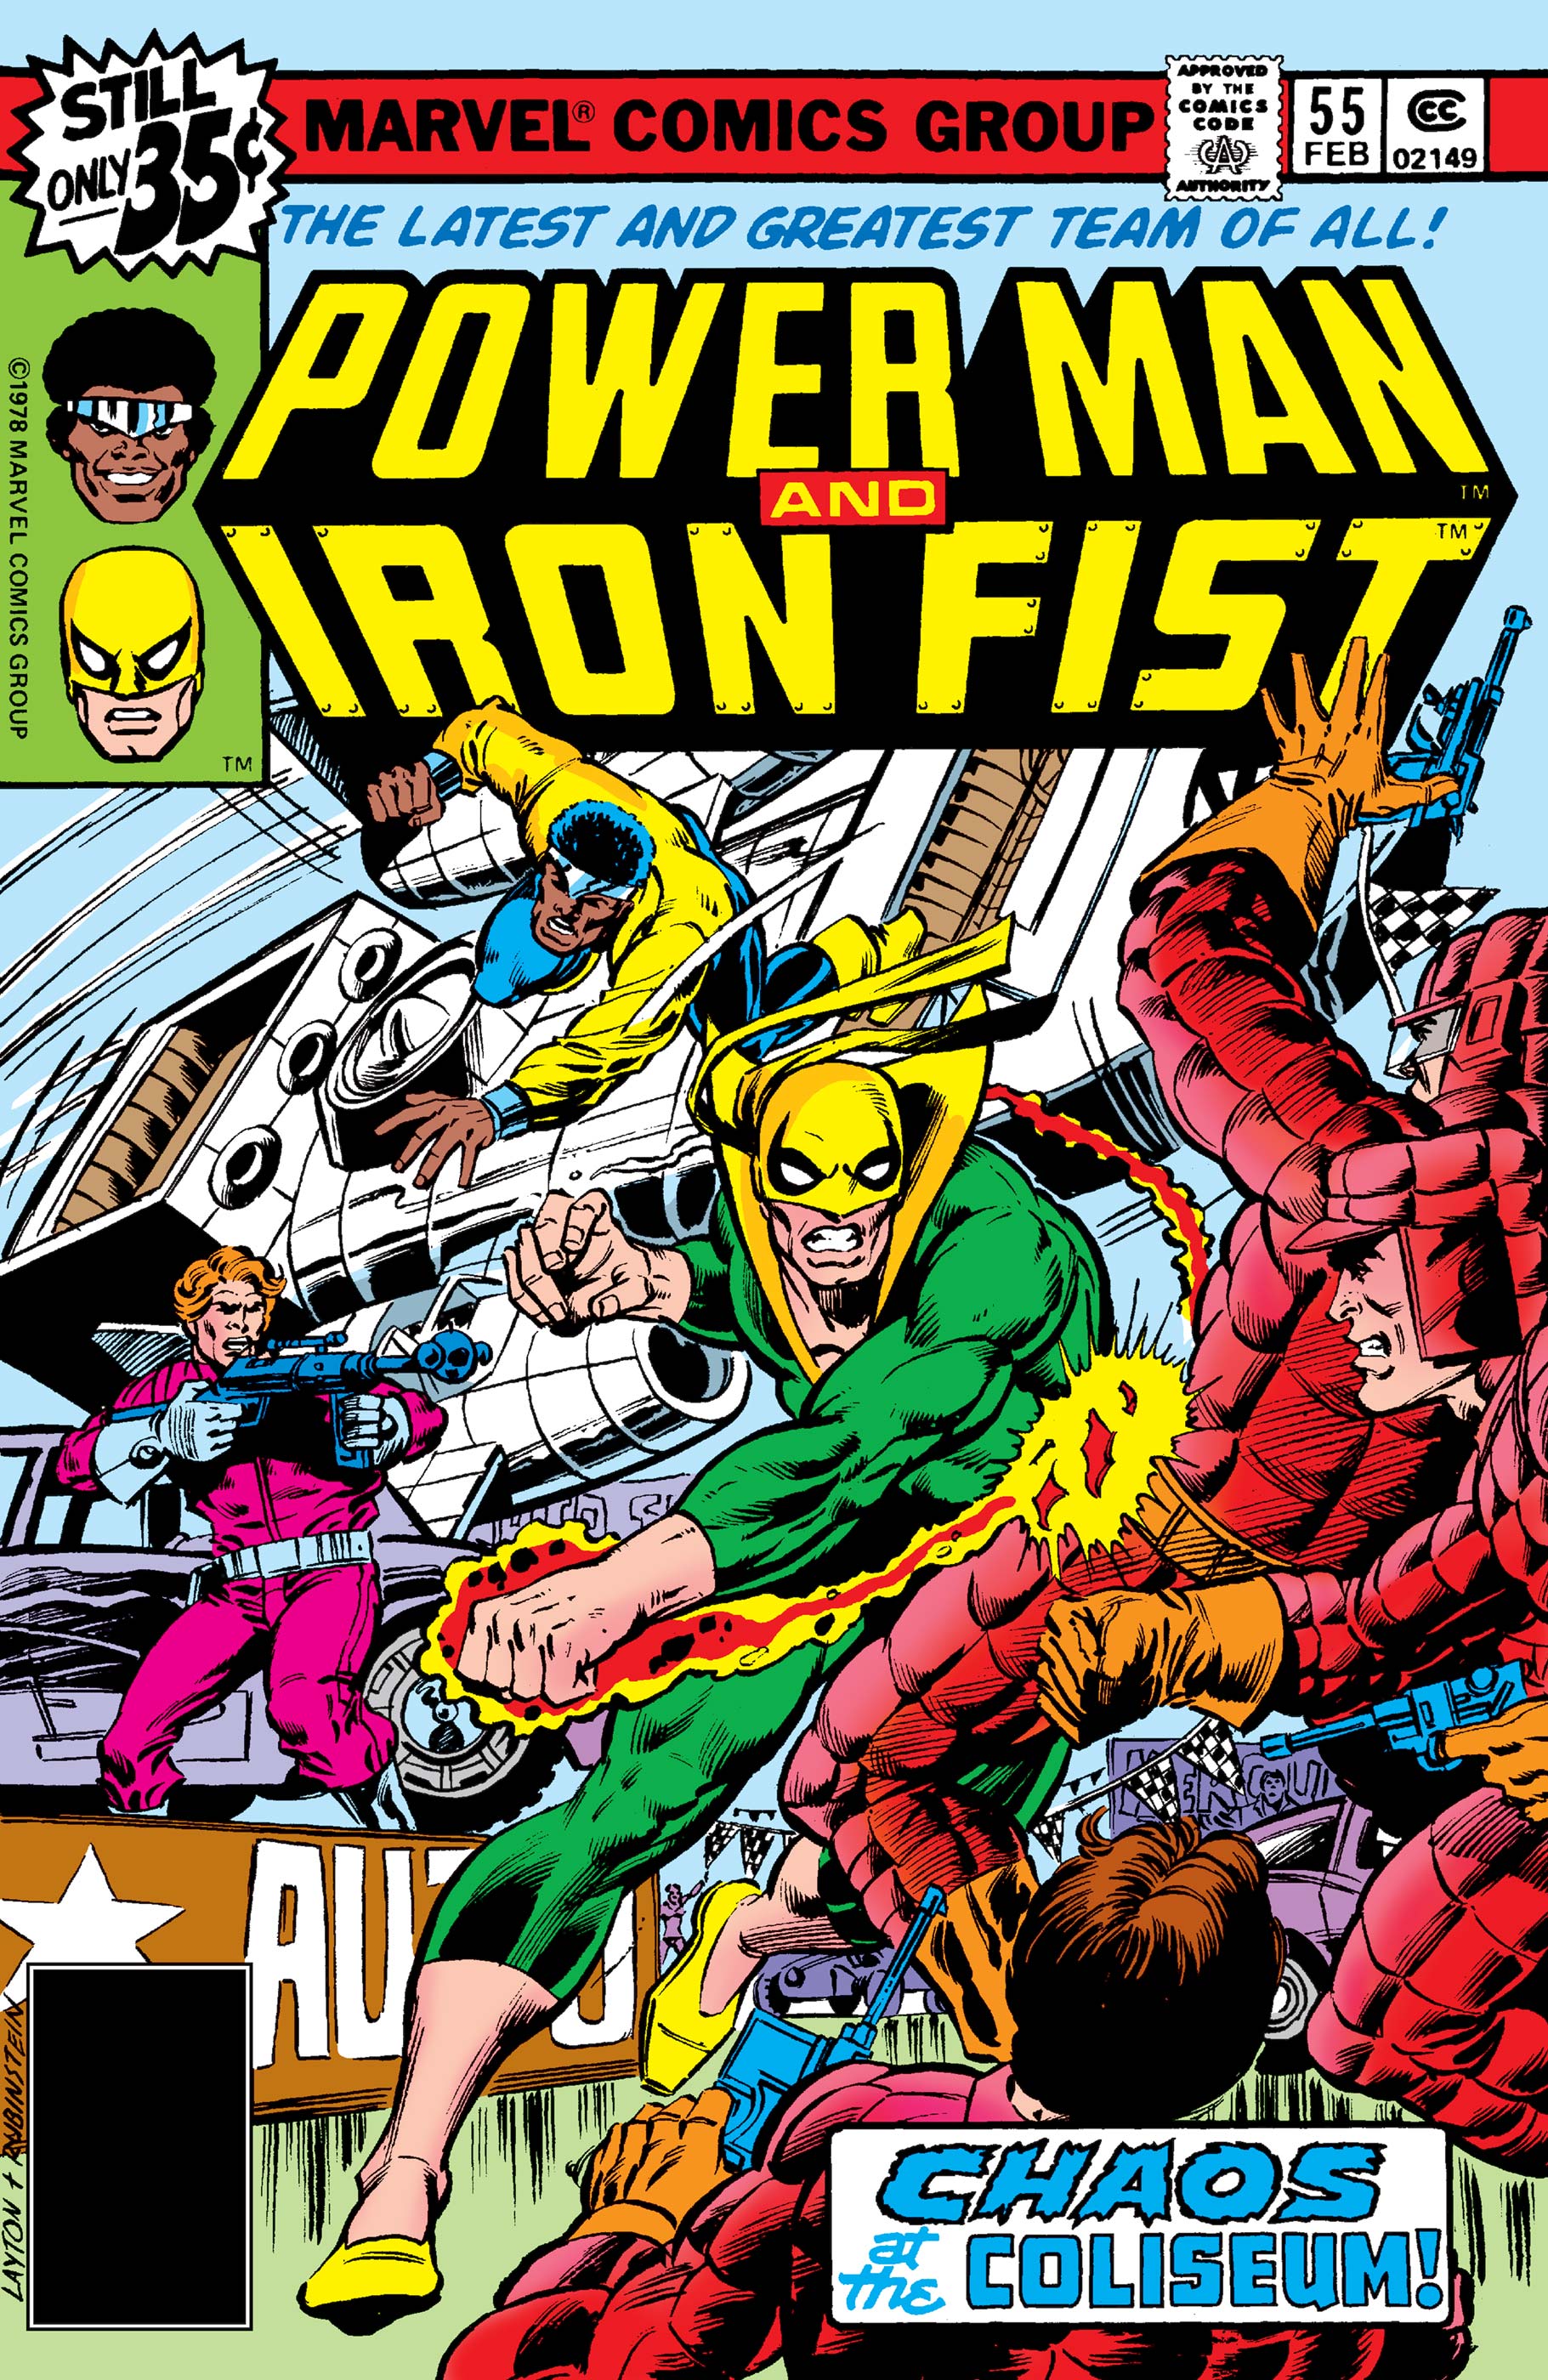 Power Man and Iron Fist (1978) #55